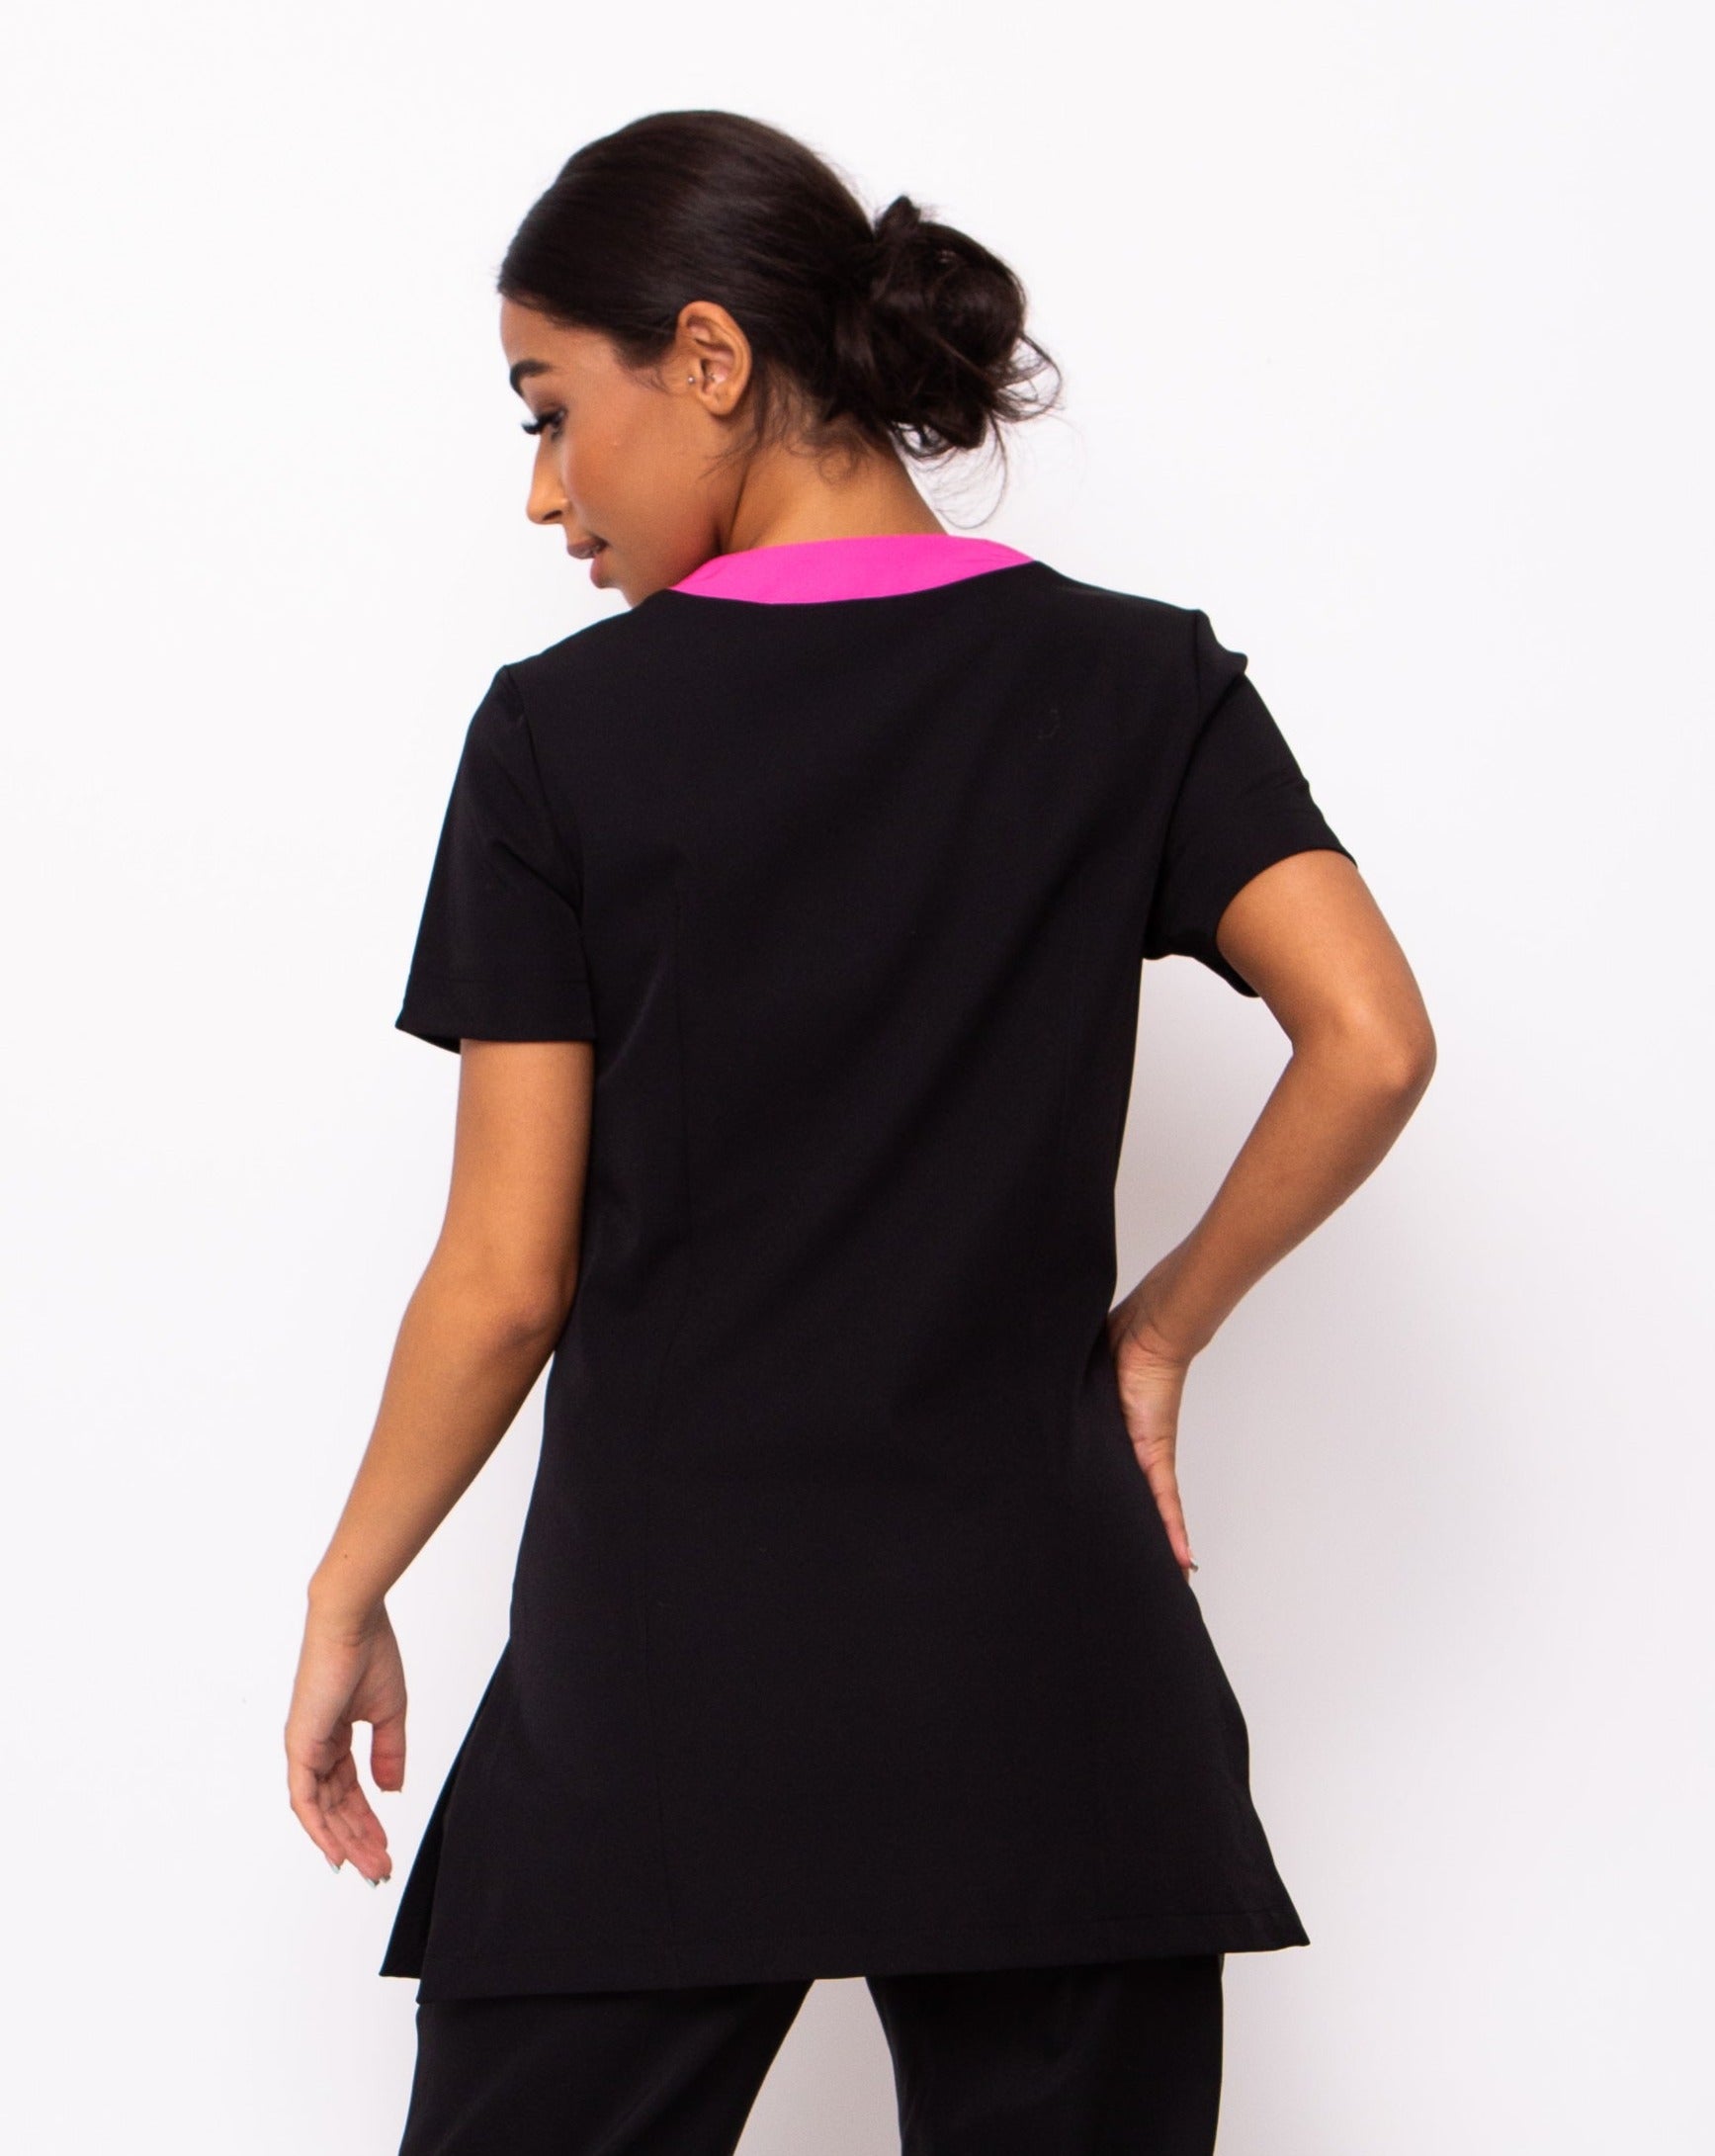 Black and hot pink beauty tunic